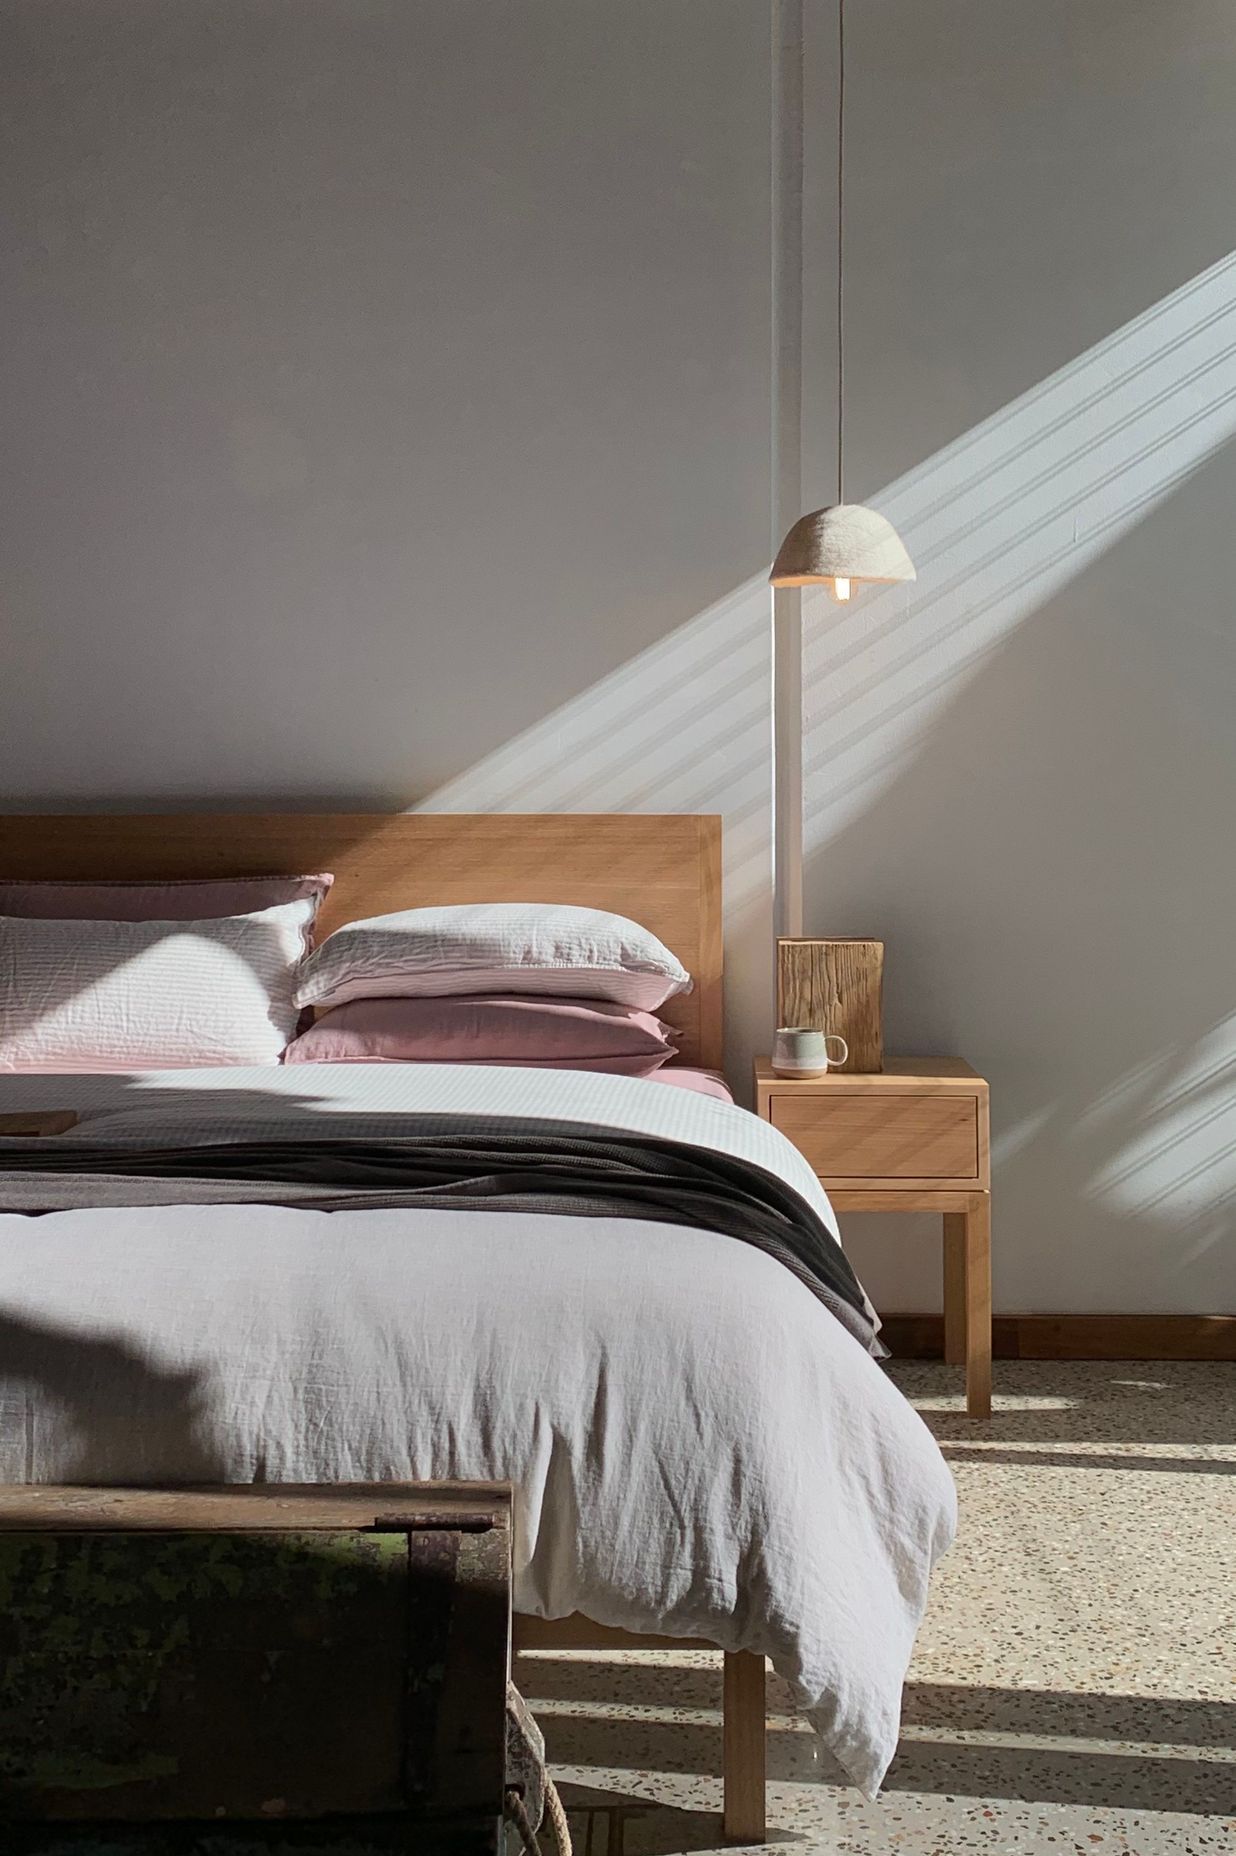 The Natural bedding Company's beds are ideal for those who suffer from allergies.